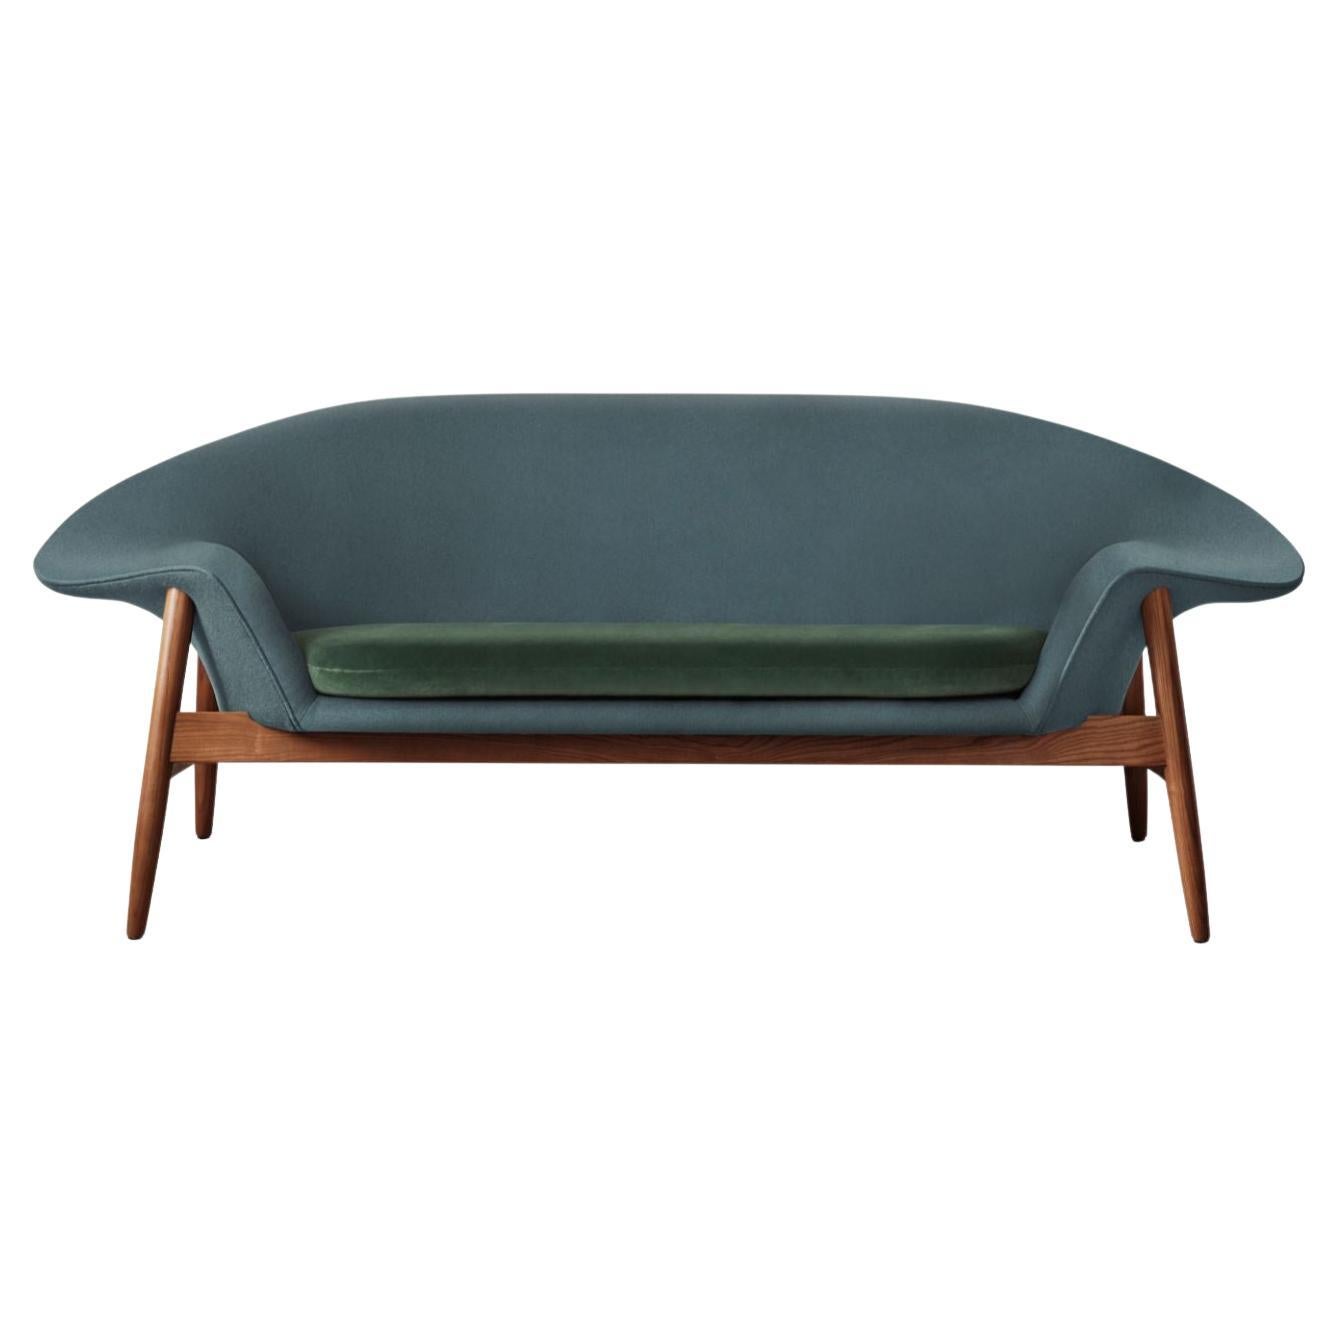 Fried Egg Sofa Petrol Forest Green by Warm Nordic